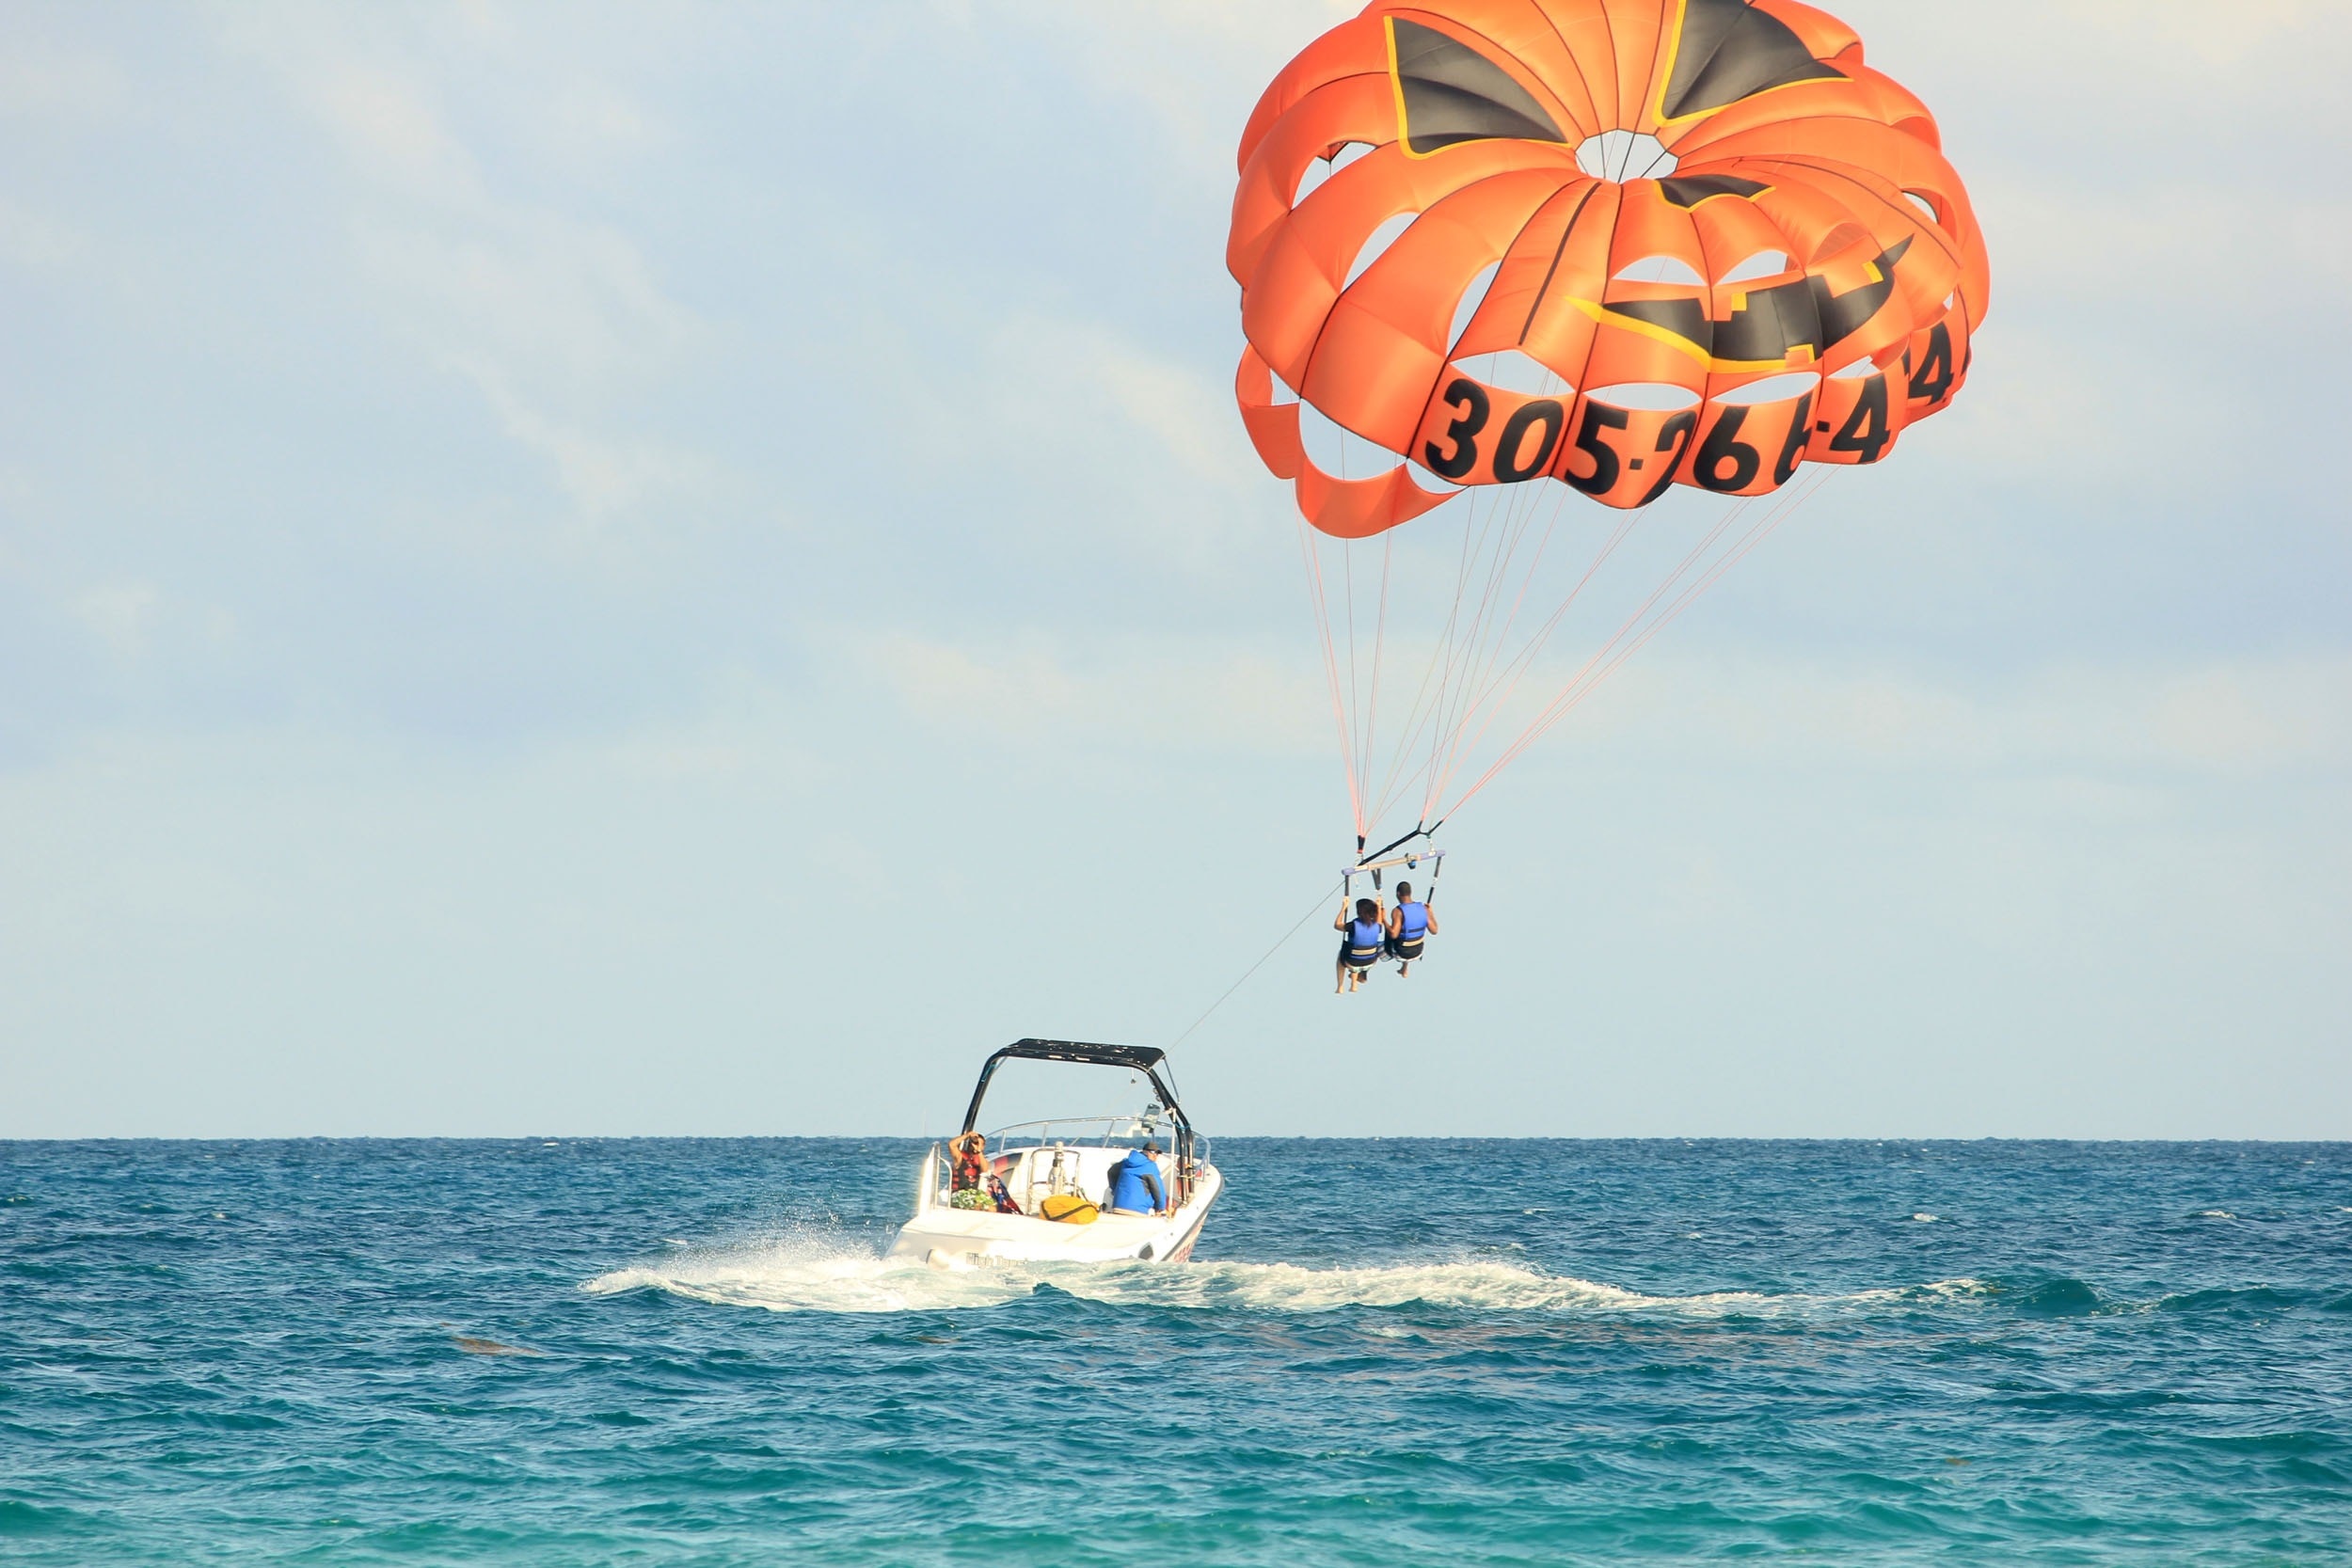 group of people parasailing on ocean